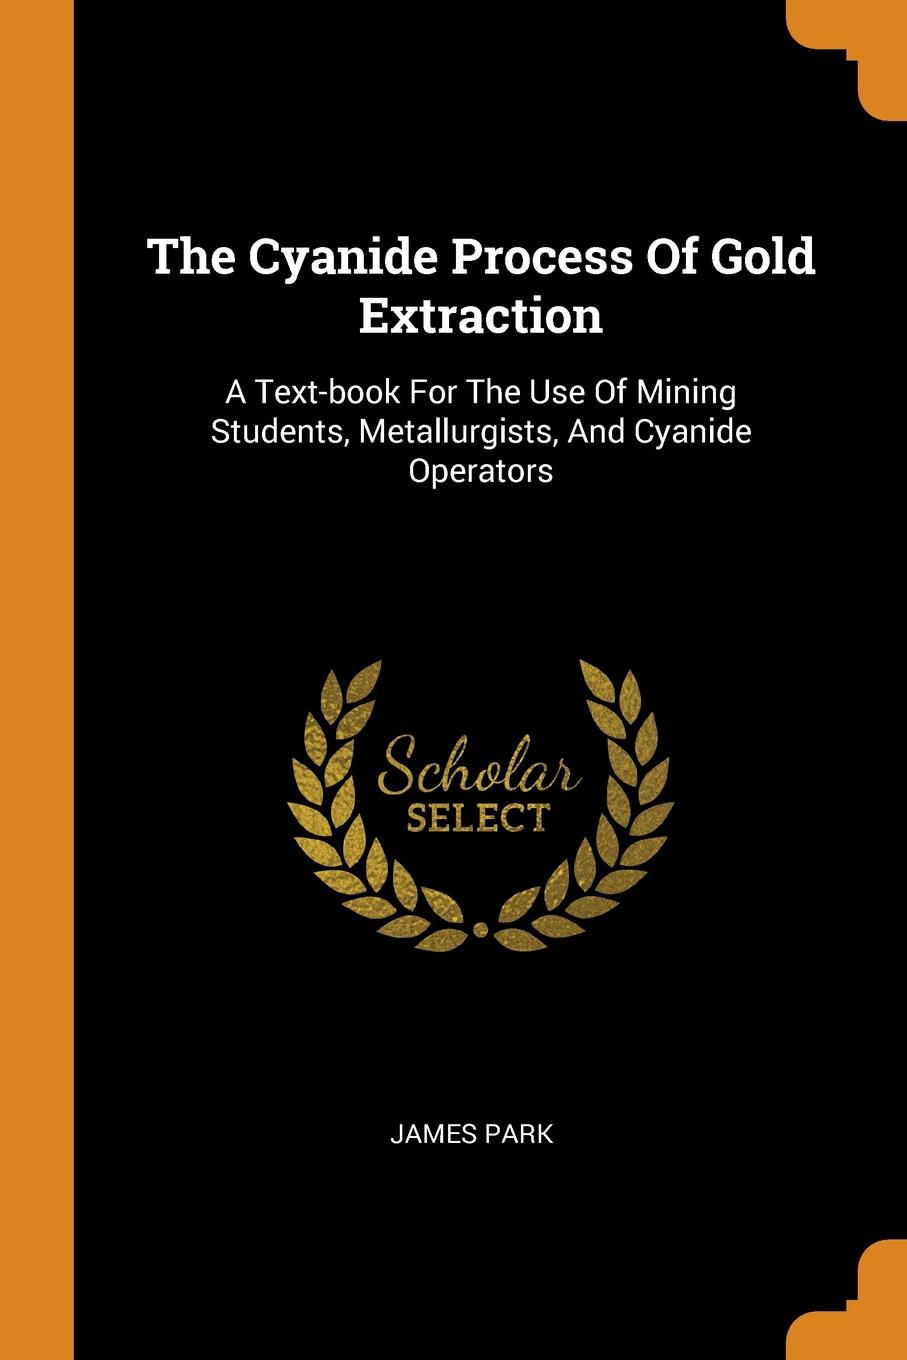 The Cyanide Process Of Gold Extraction. A Text-book For The Use Of Mining Students, Metallurgists, And Cyanide Operators